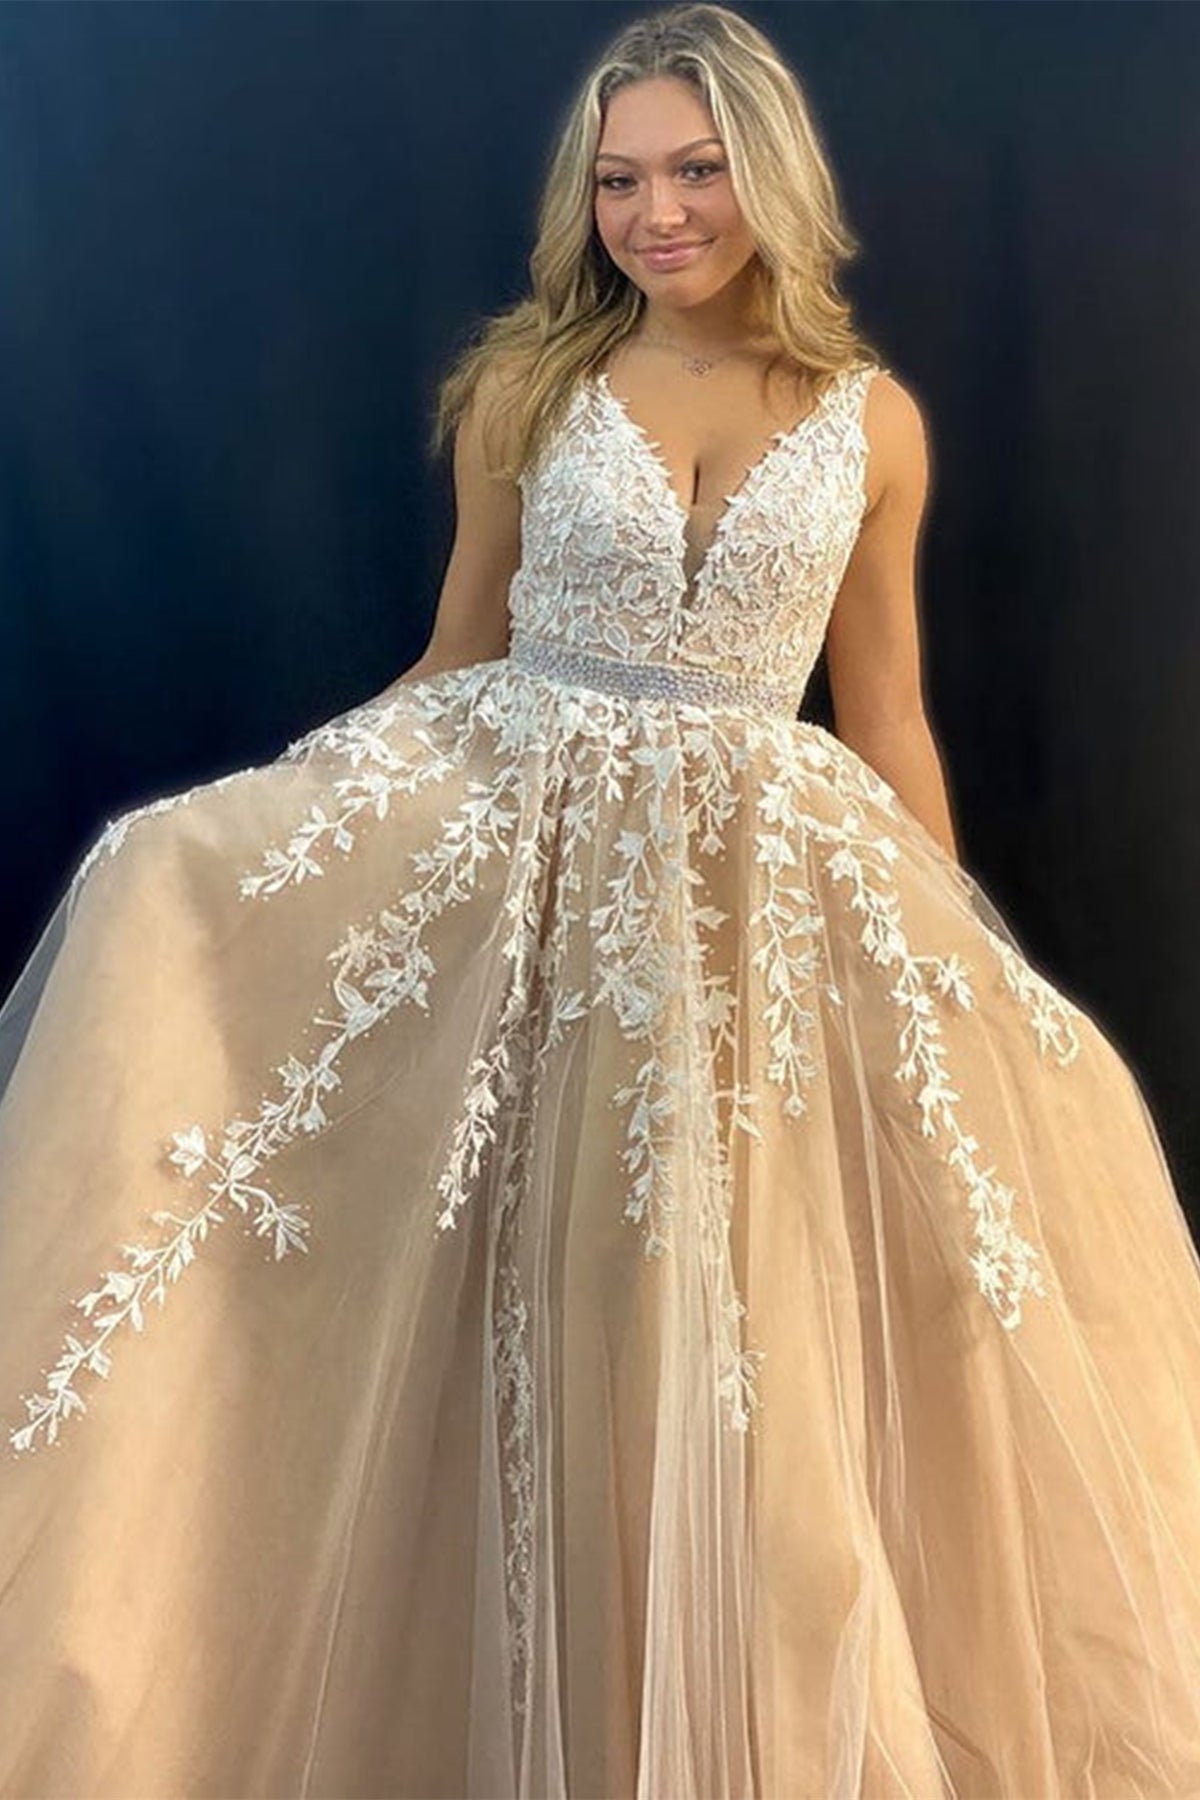 V Neck Open Back Champagne Tulle Lace Long Prom Dresses with Belt, Champagne Lace Formal Graduation Evening Dresses EP1714